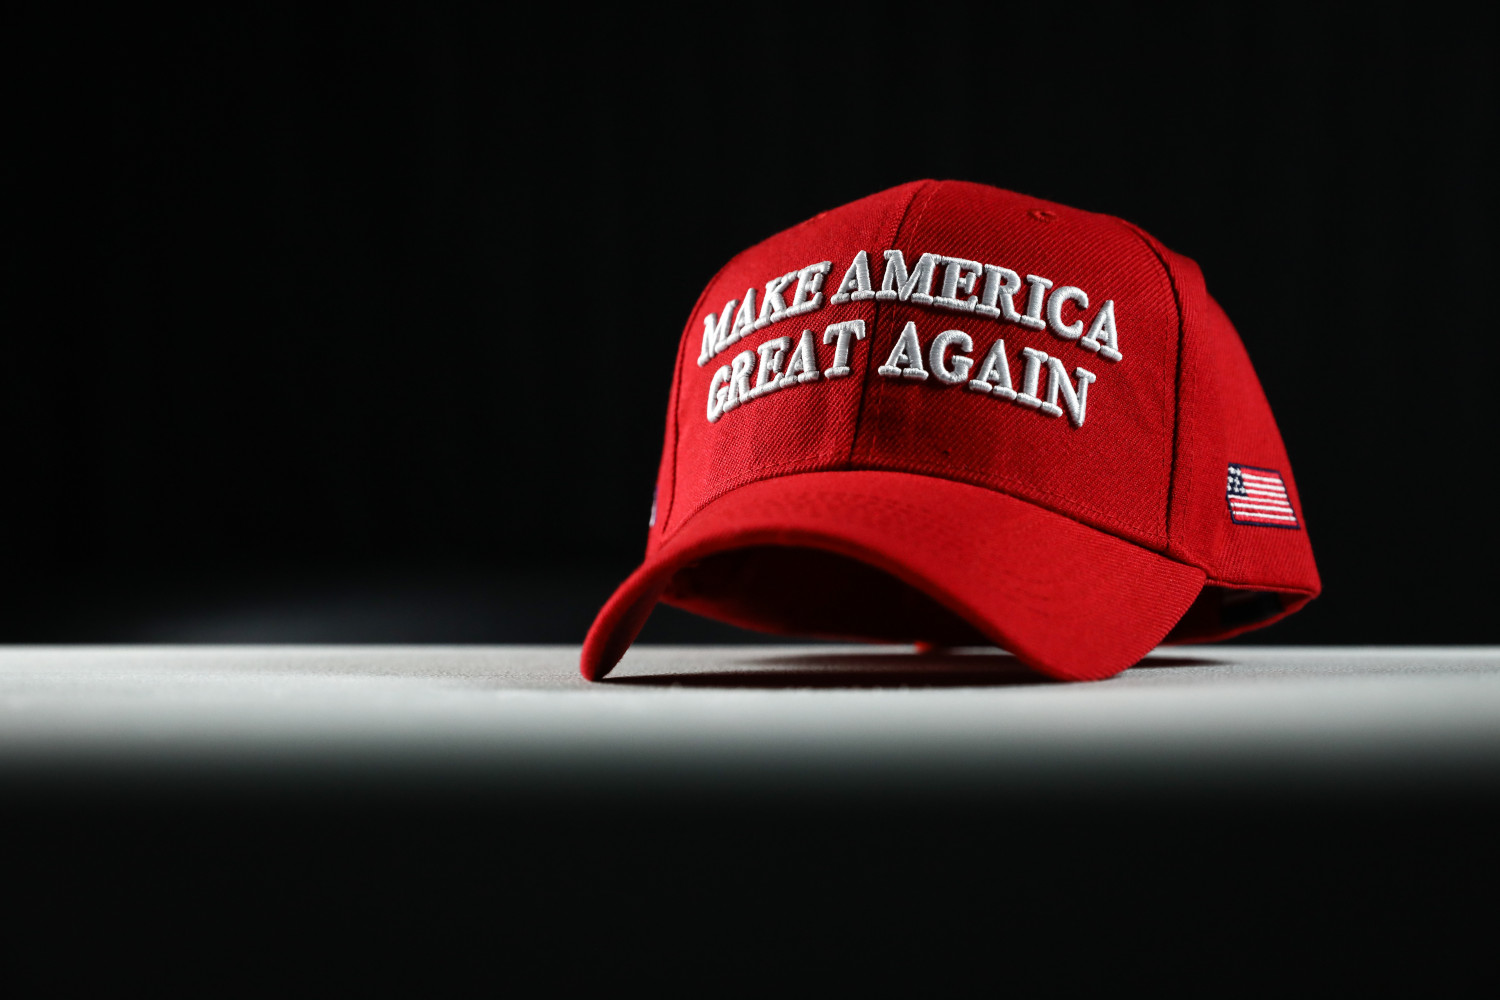 Black Trump Supporter Mulling Lawsuit Against Daily Beast After Being Doxxed